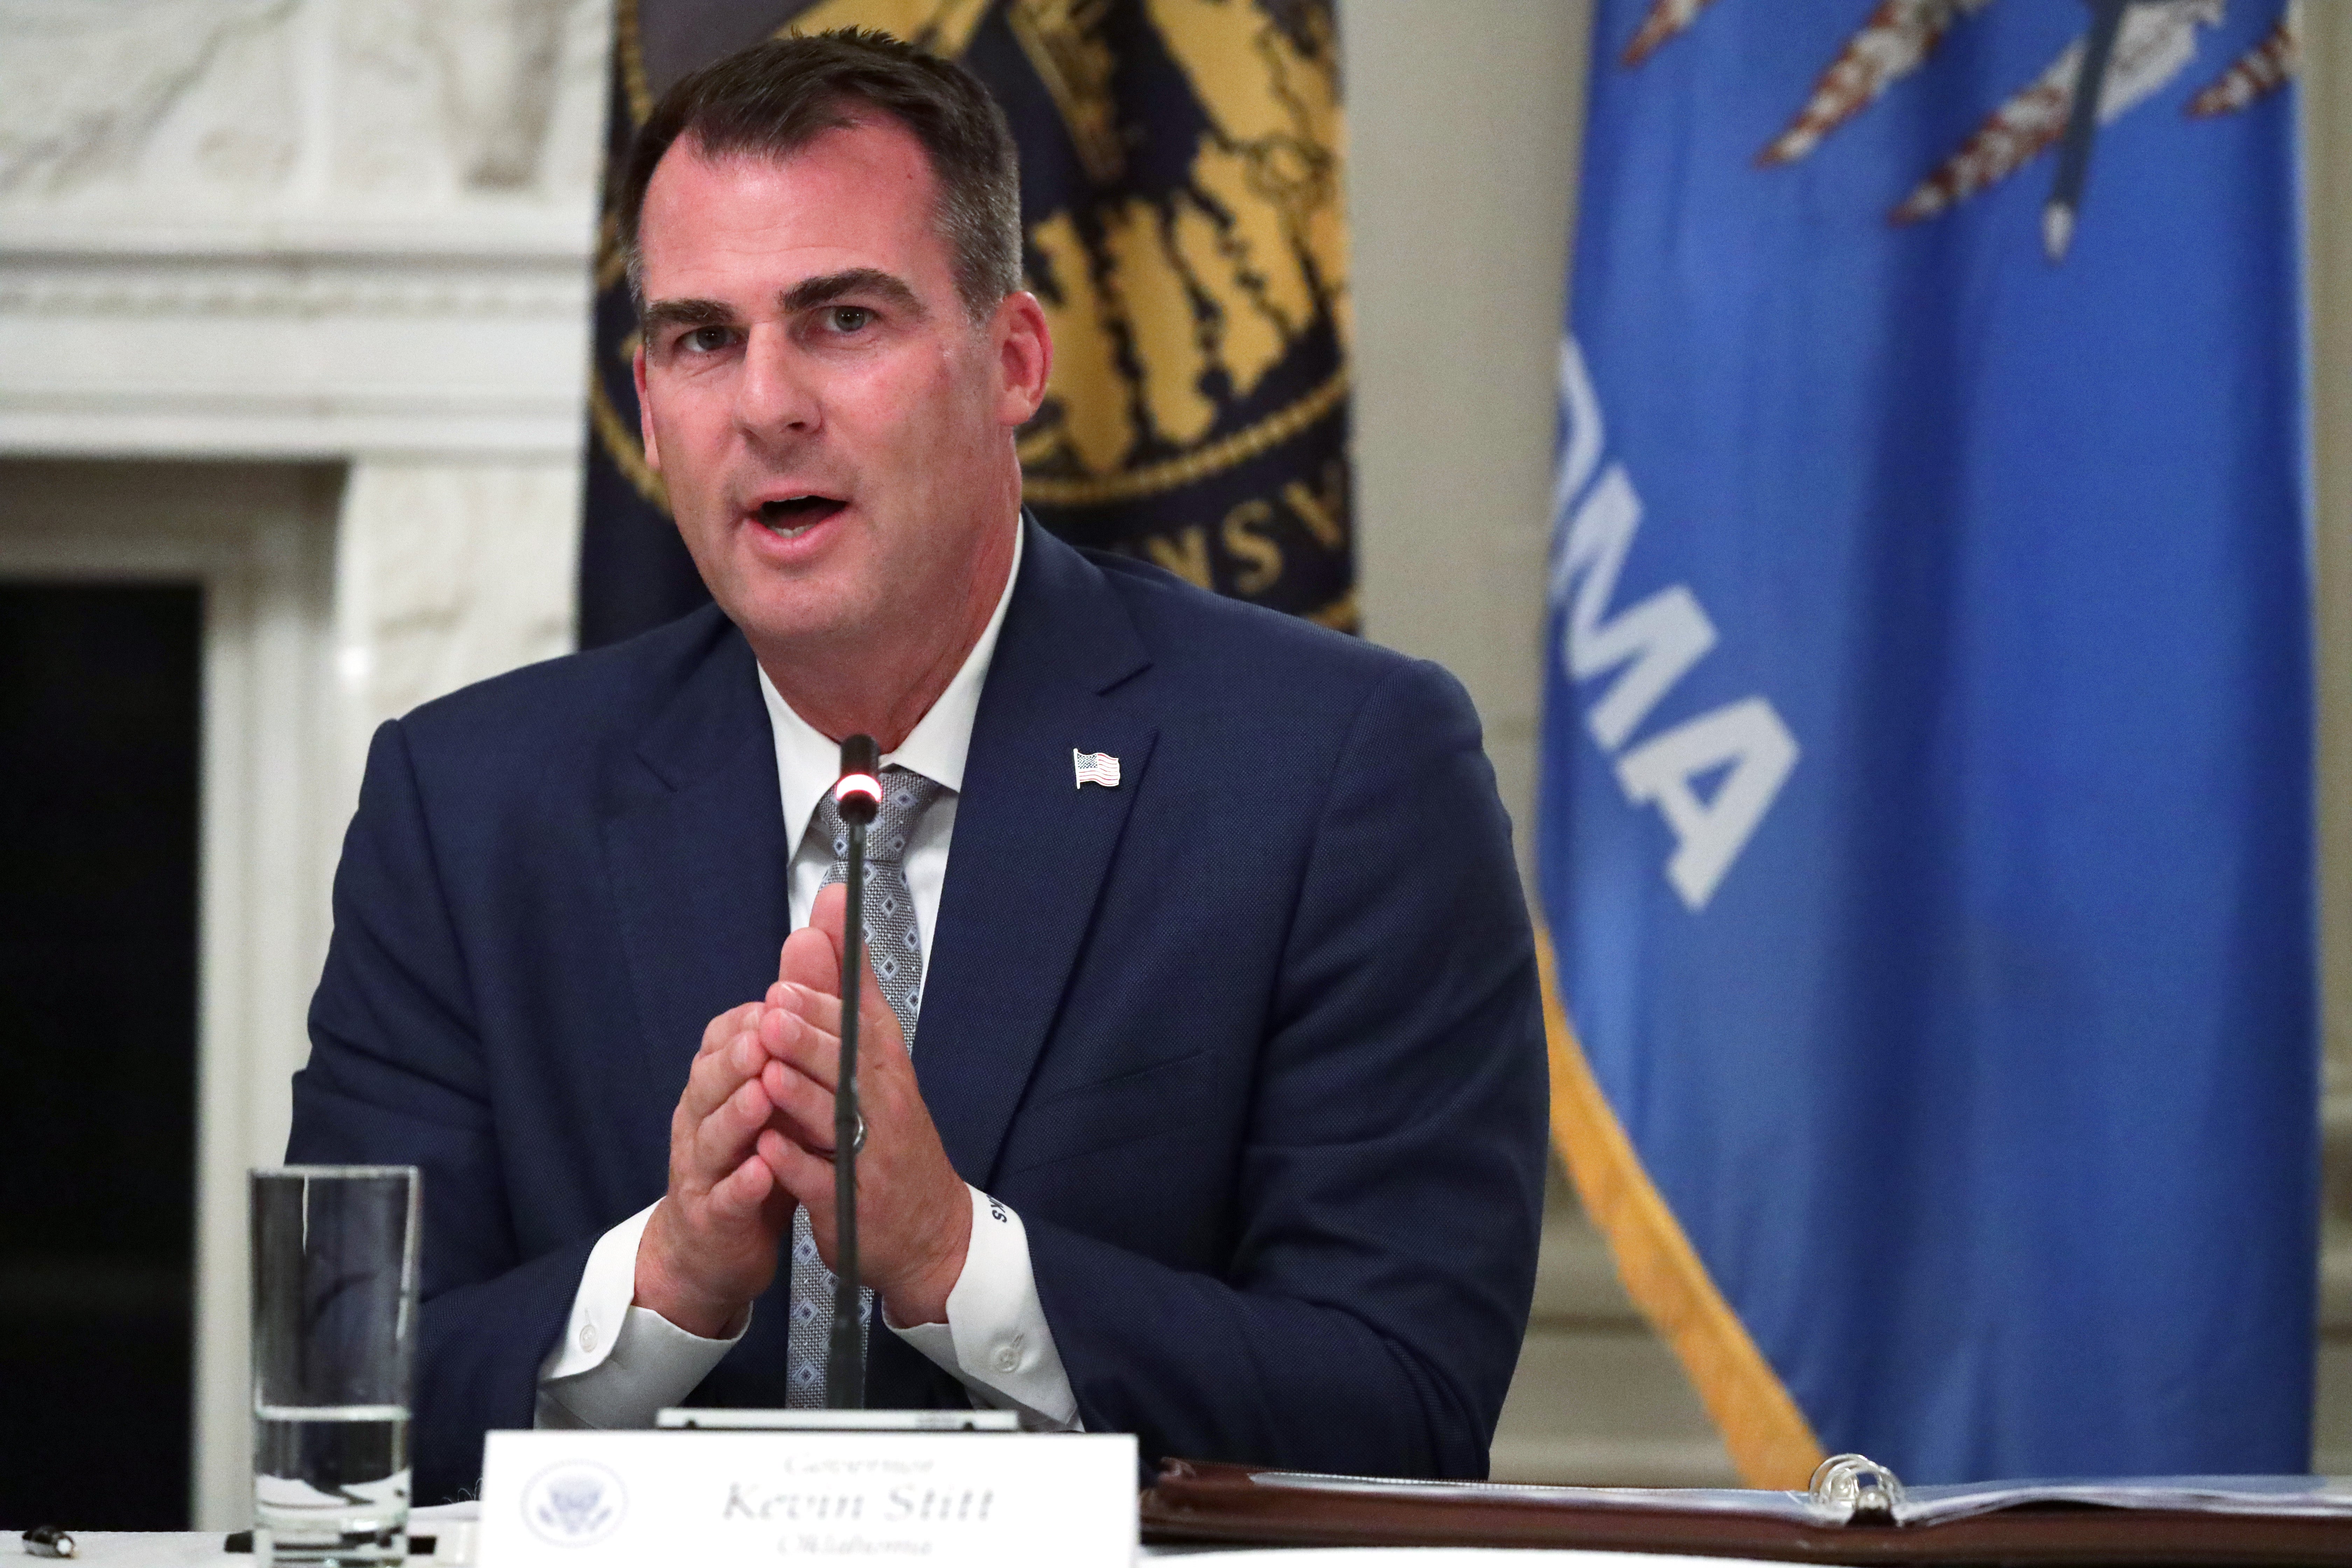 Oklahoma’s Republican Governor Kevin Stitt supported the creation of a publicly funded Catholic school. On June 25, the state’s Supreme Court said it’s unconstitutional.